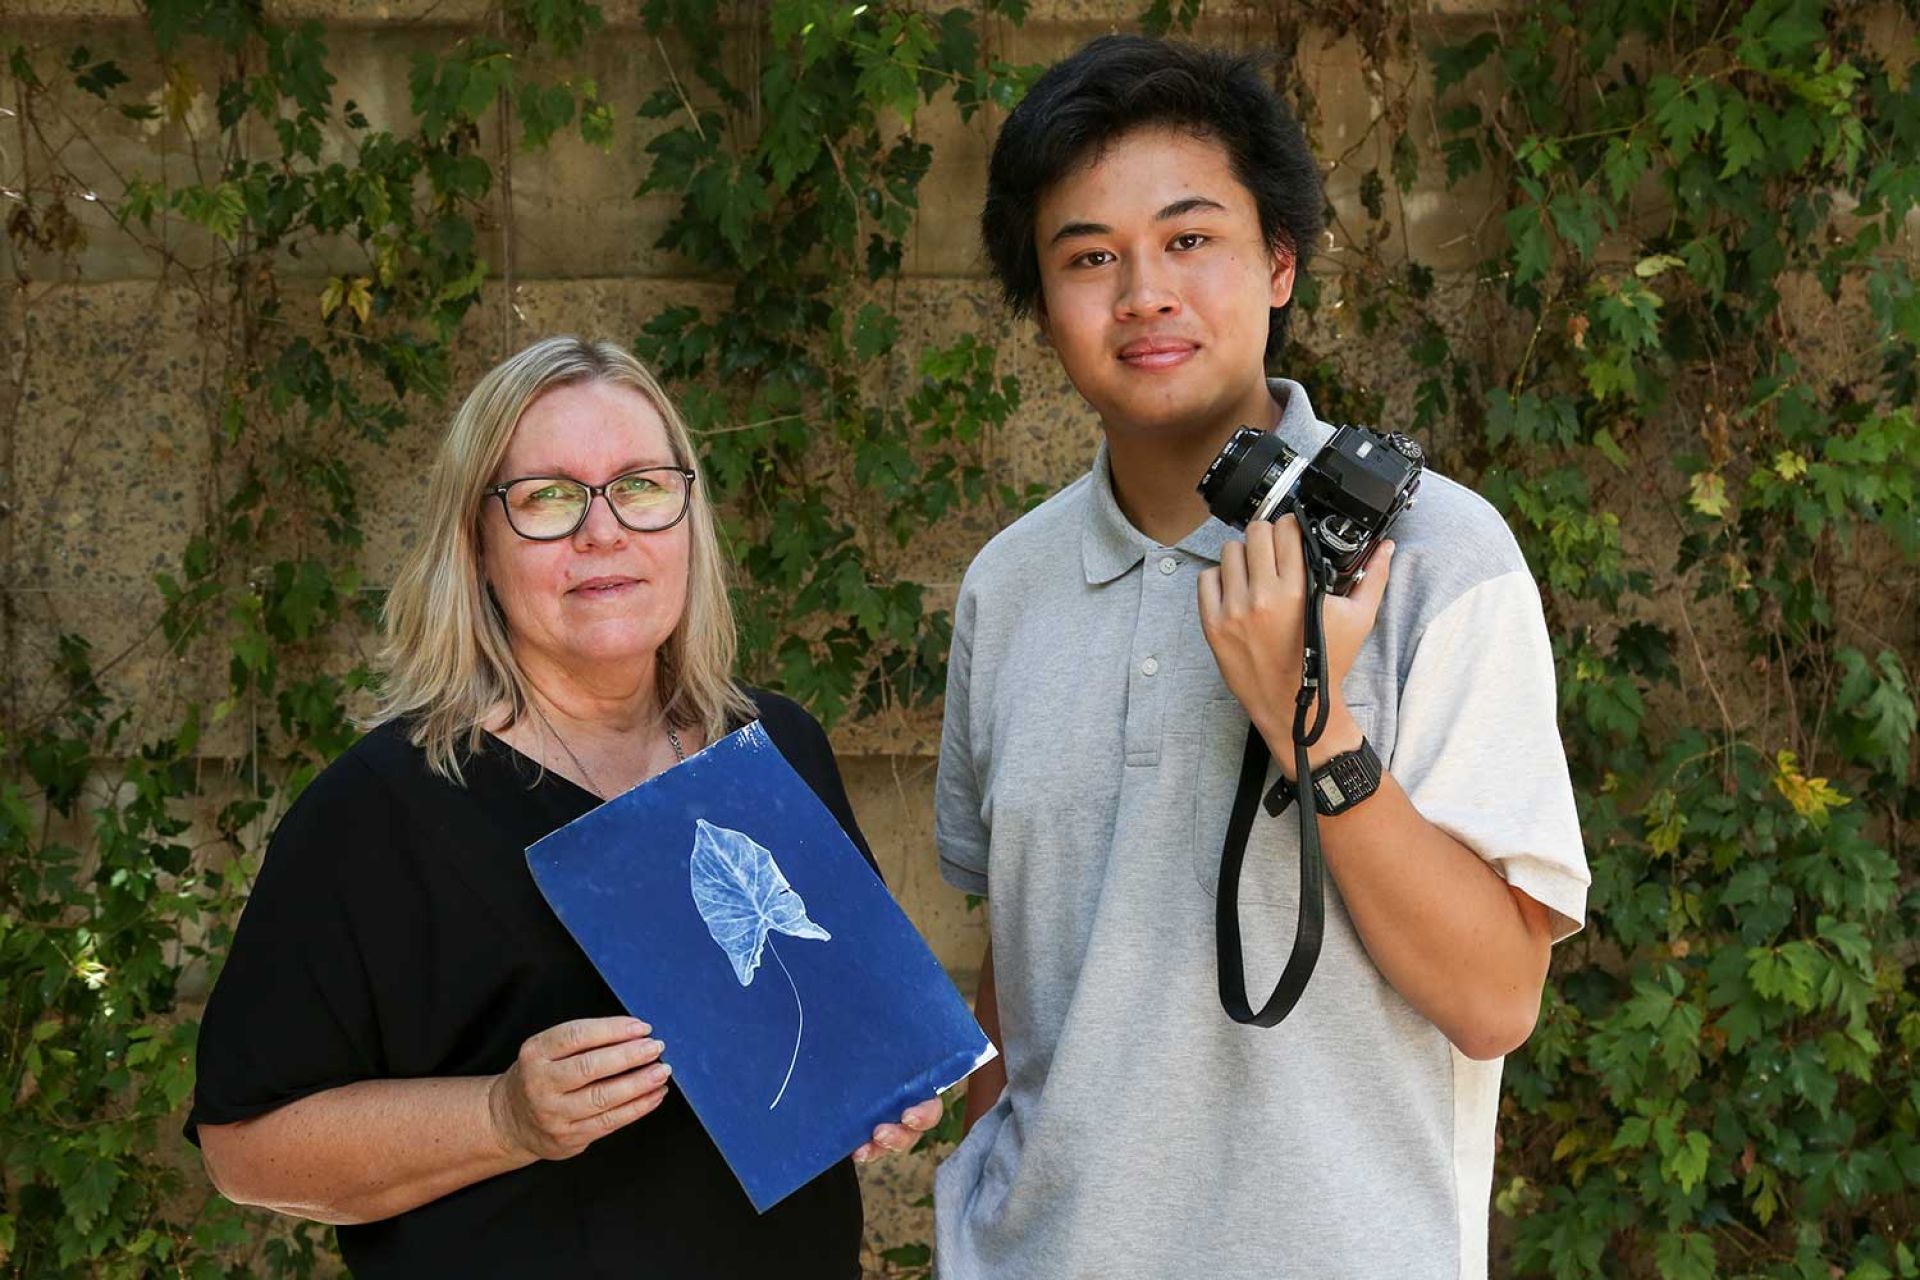 Ann holds a vibrant blue cyanotype image of a leaf, next to her is a young male holding a film camera